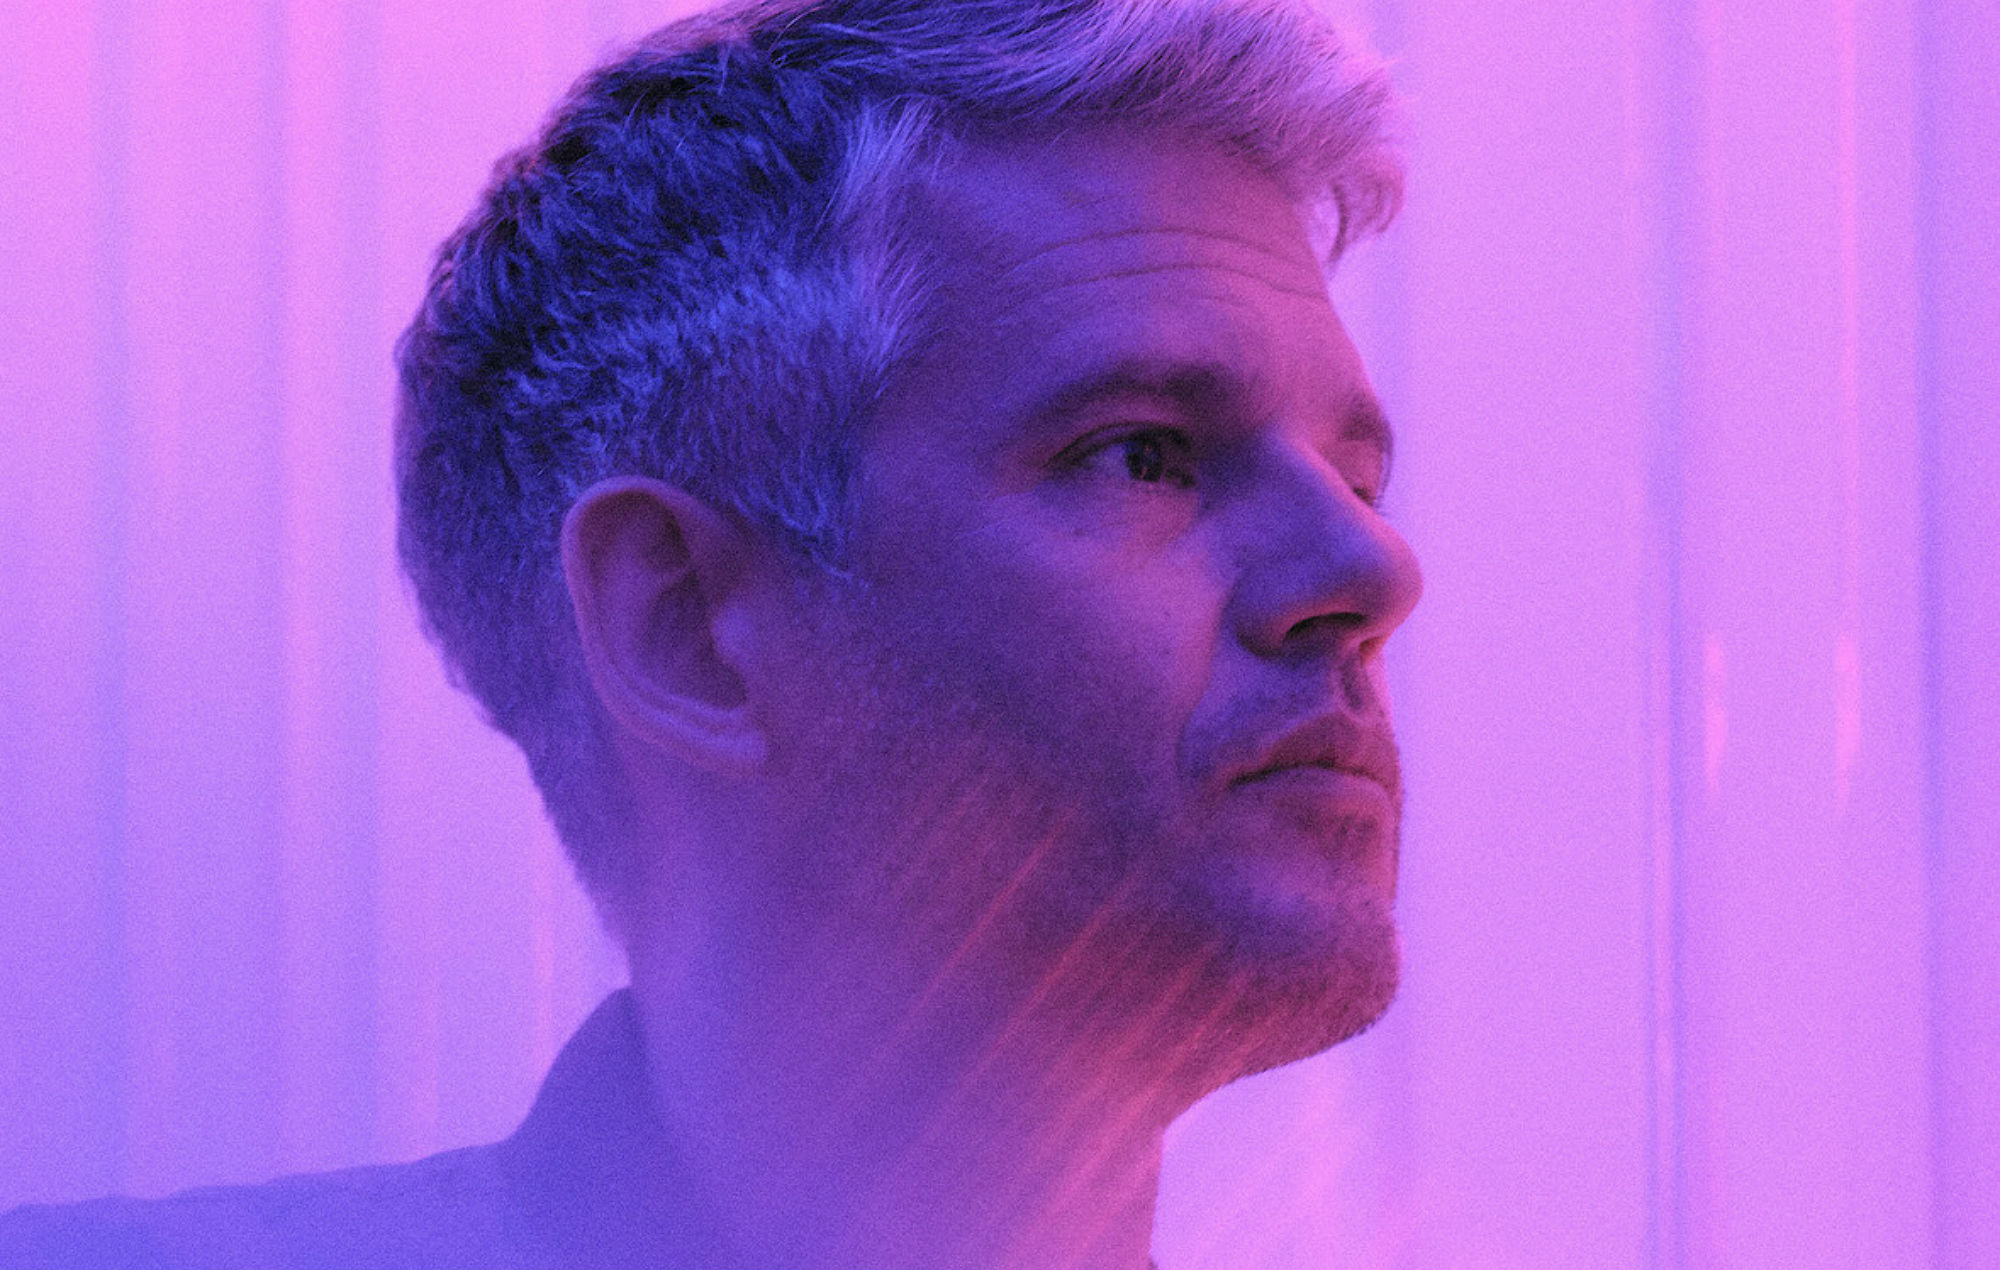 Paul Epworth tells us about his sci-fi-inspired debut solo album and “nostalgic” new single ‘Love Galaxy’